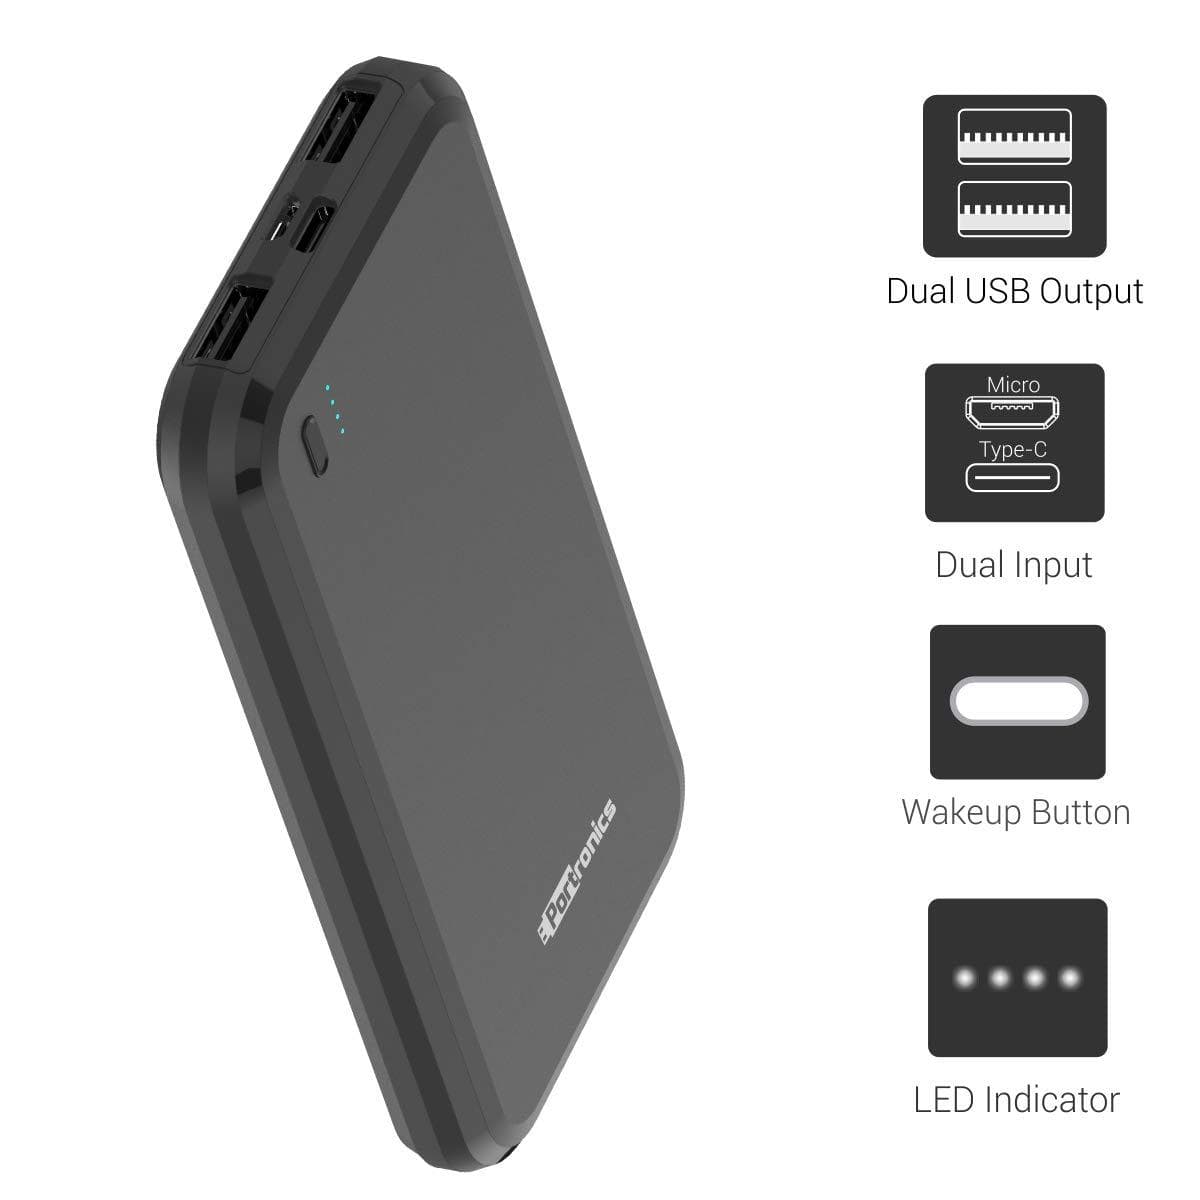 Portronics Power Brick 10 POR-1014, 10000mAh Power Bank with LED Indicator, 2.0A Dual Input (Type C + Micro USB) and Dual USB Output (2.1A + 1.0A) for All Android and iOS Devices (Black)-Power Bank-dealsplant